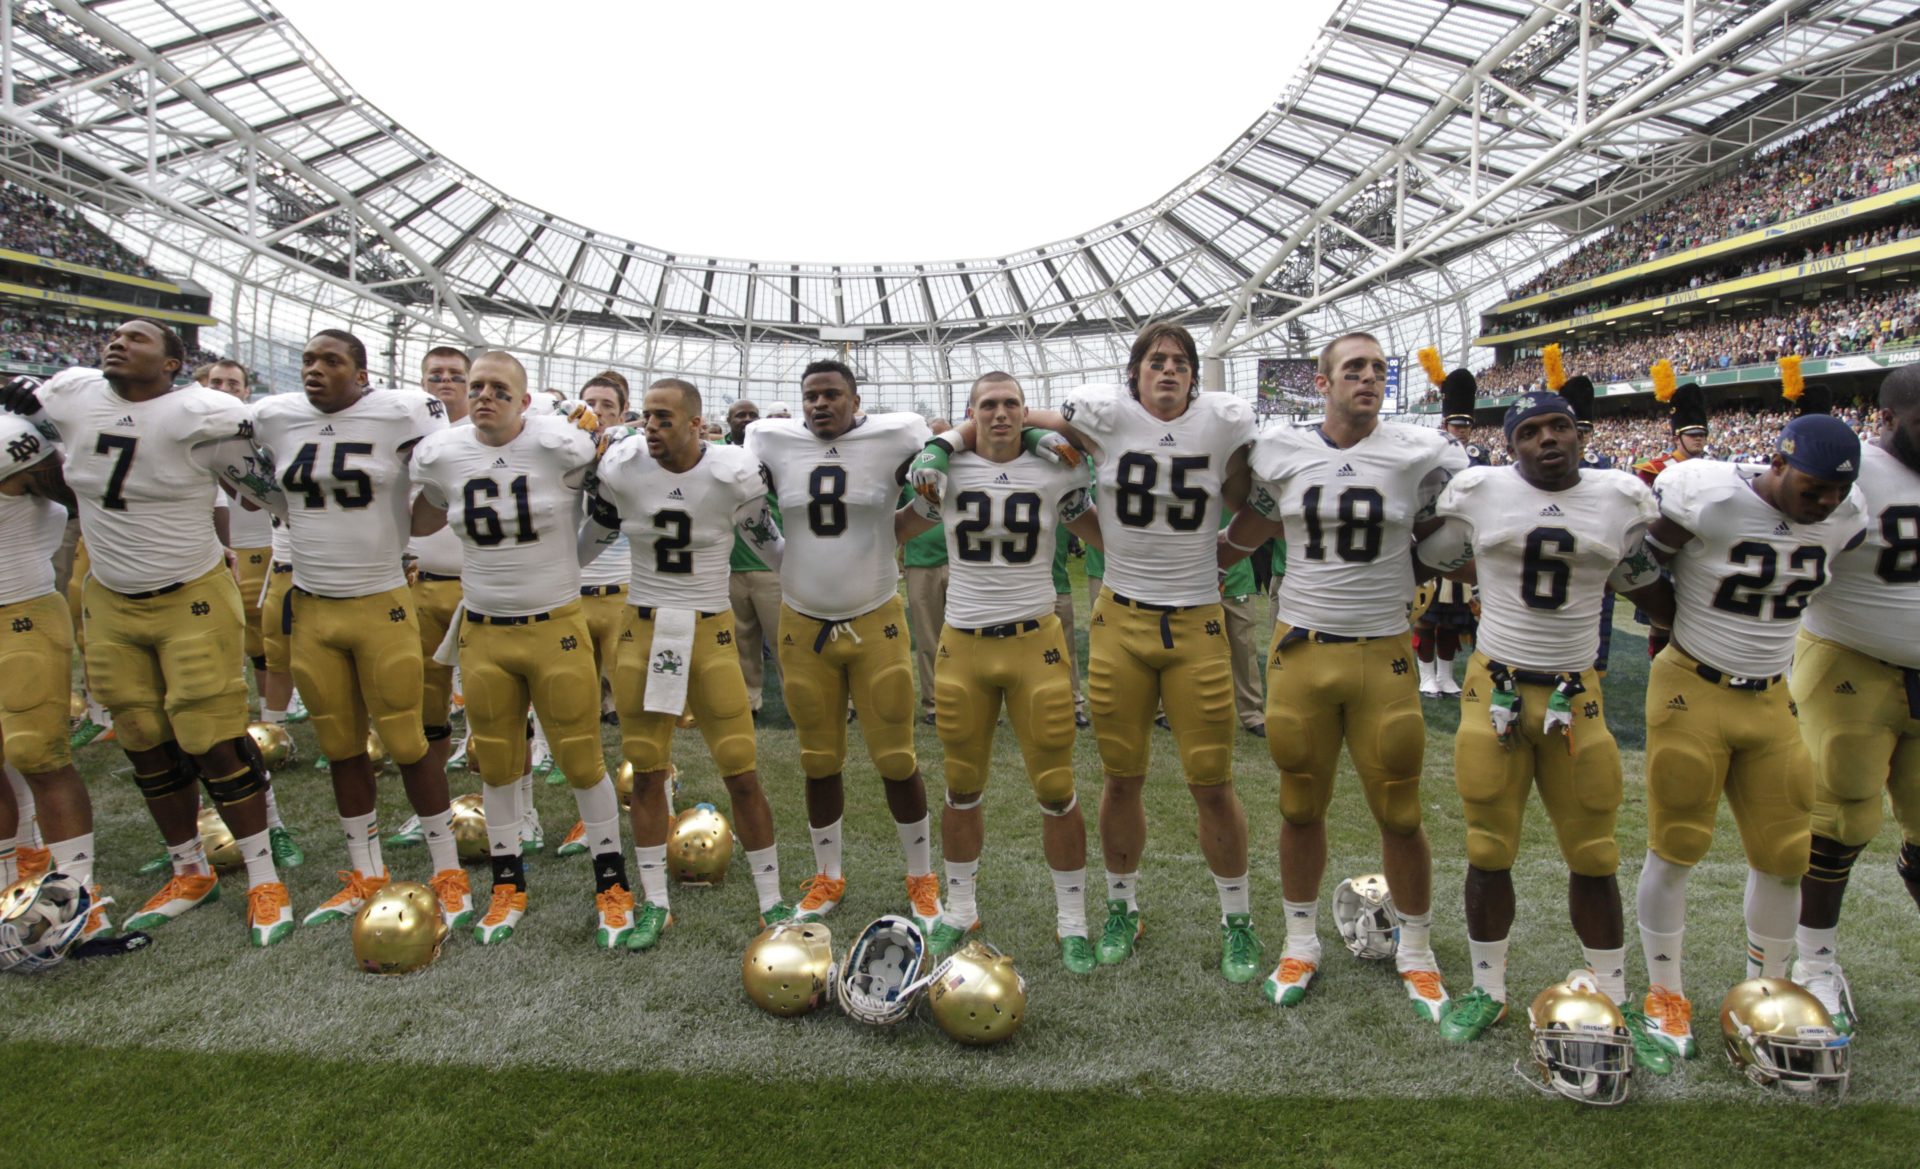 Notre Dame players pose after the final whistle of their NCAA college football game against Navy, in Dublin,